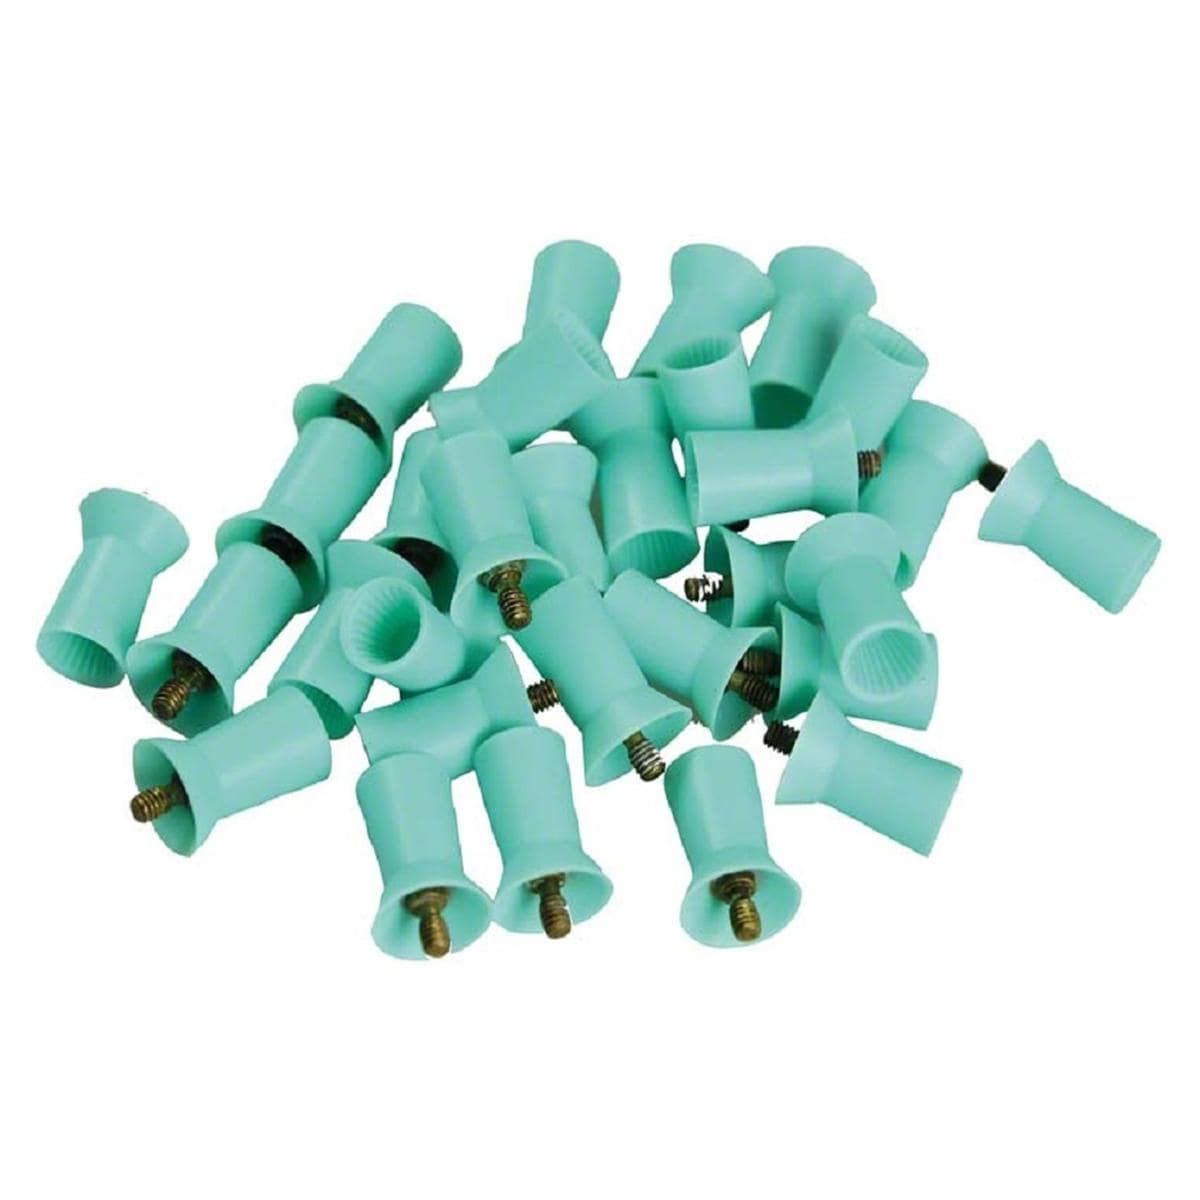 KerrHawe Prophy Cups - 9000/12 Stries, turquoise screw-type souple, 120 pcs